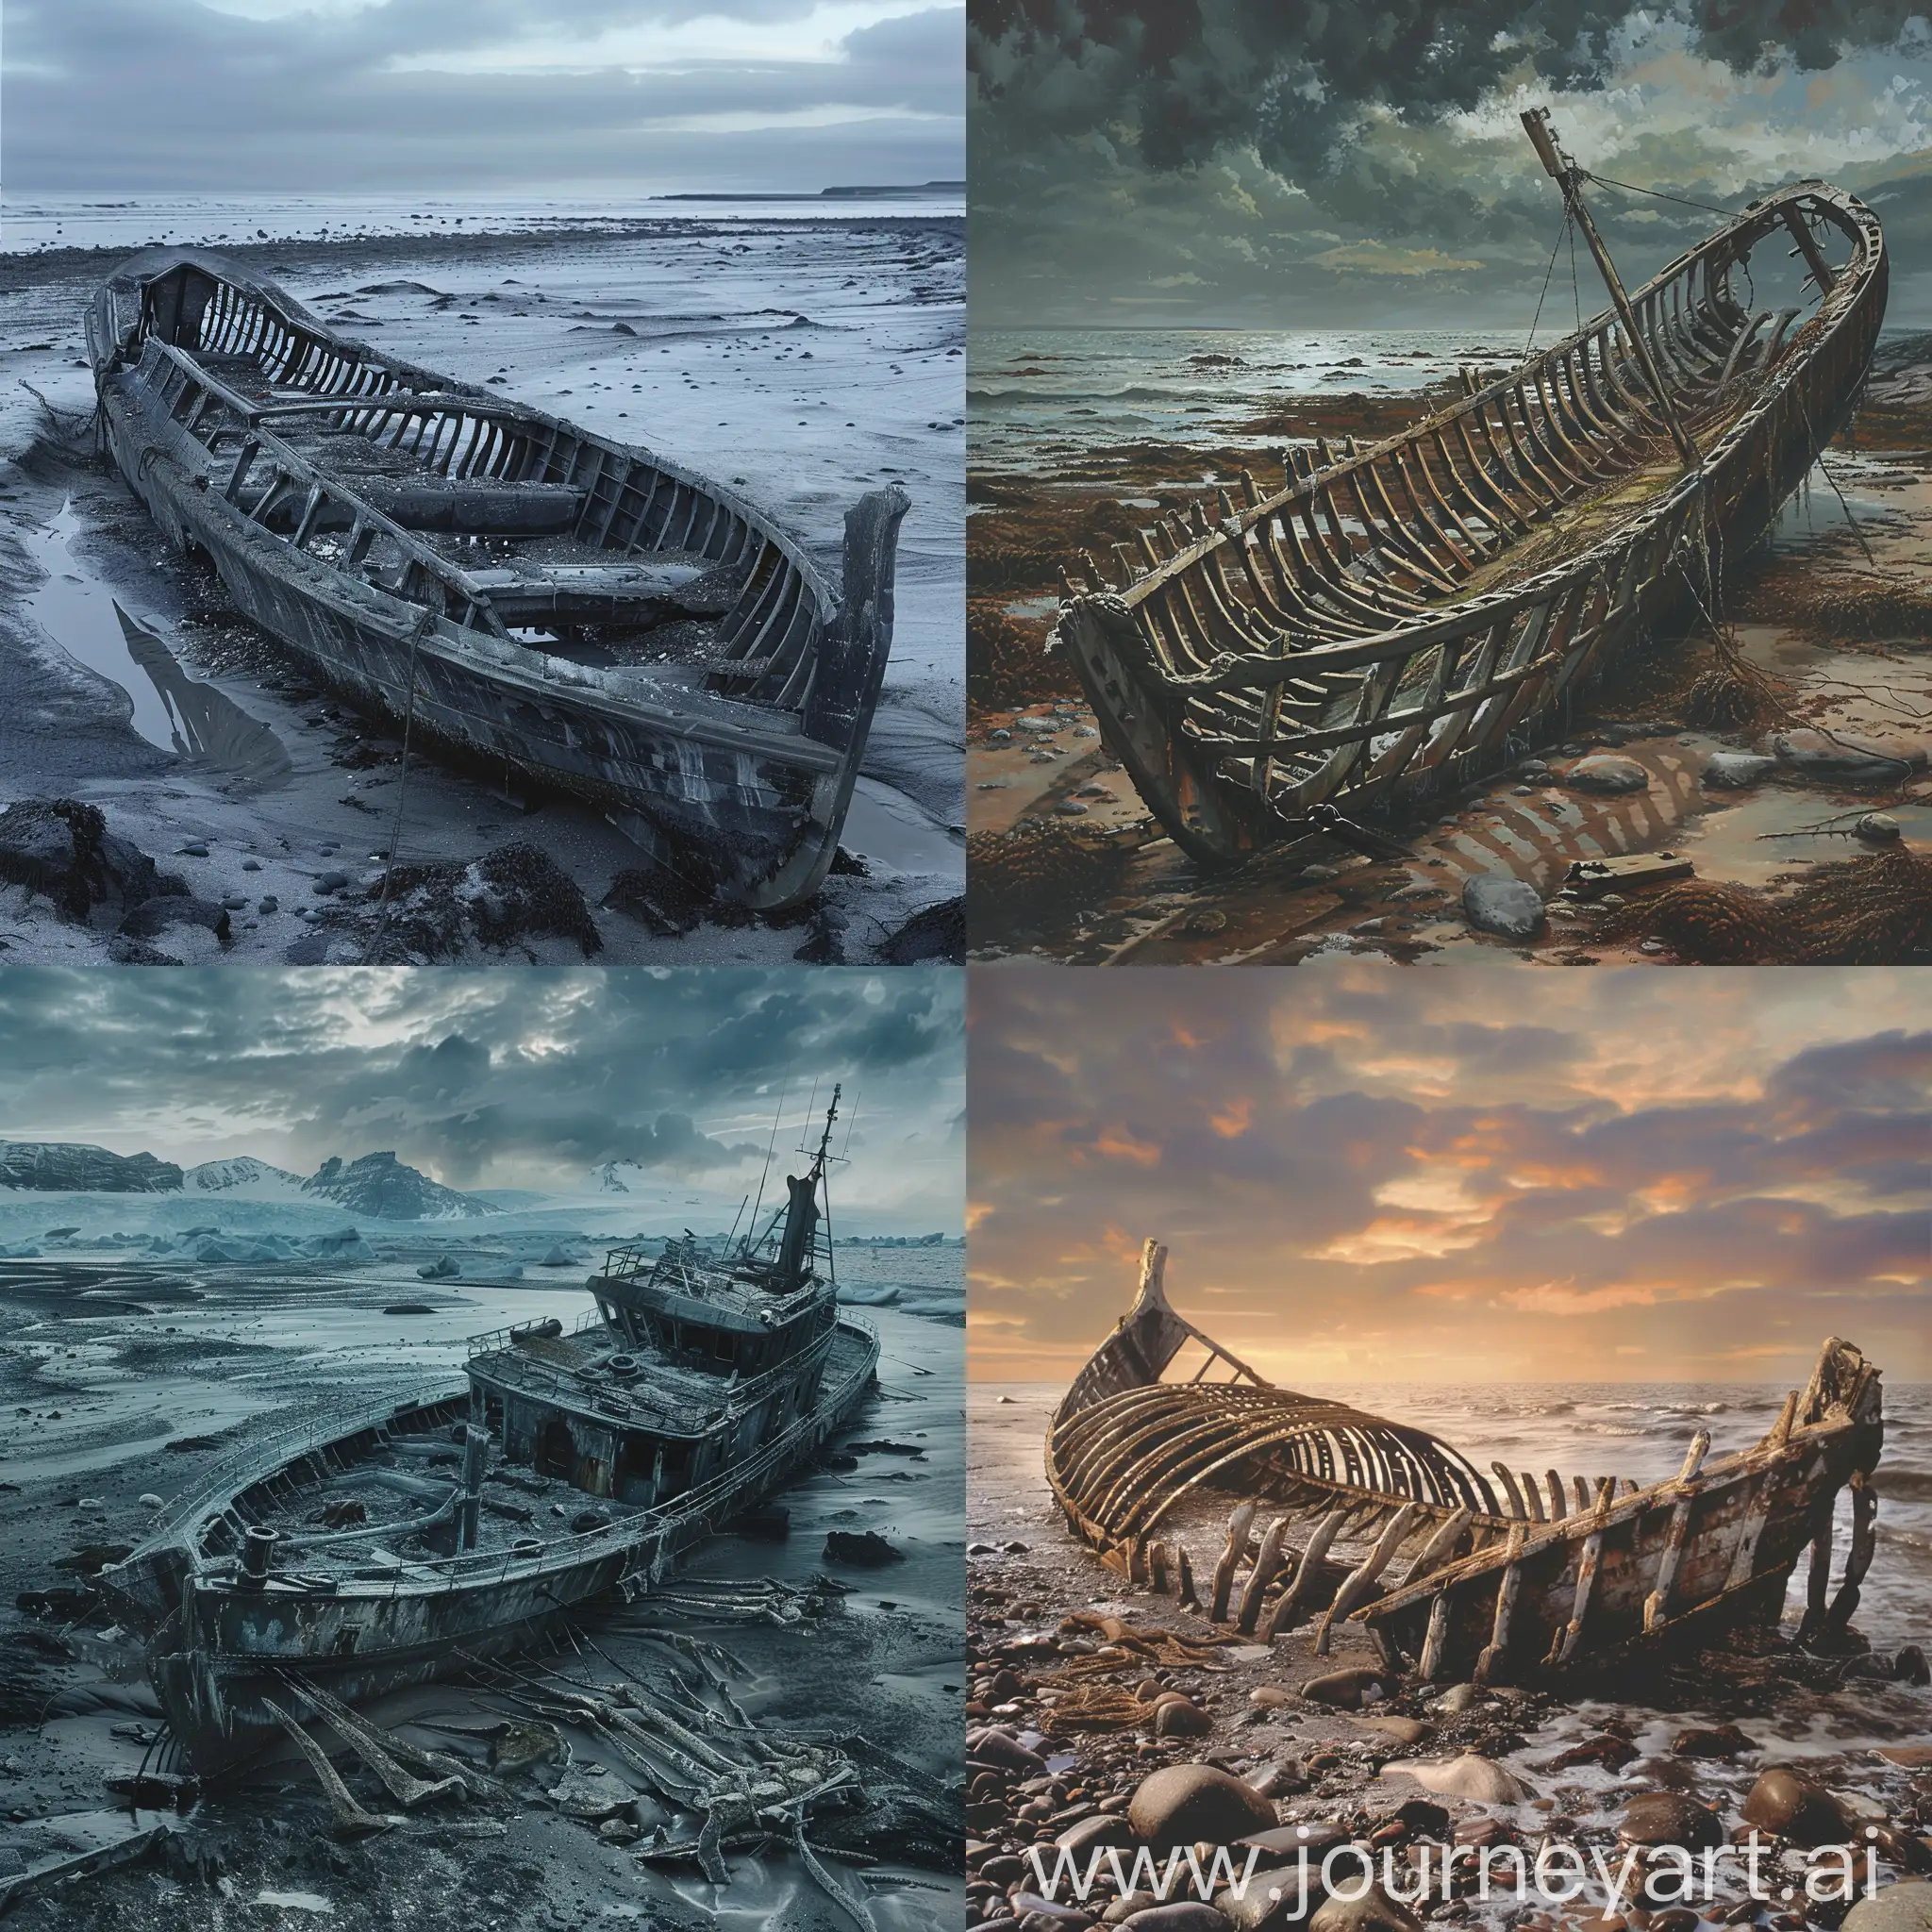 Deserted-Northern-Sea-Shore-with-Discarded-Fishing-Vessel-Skeleton